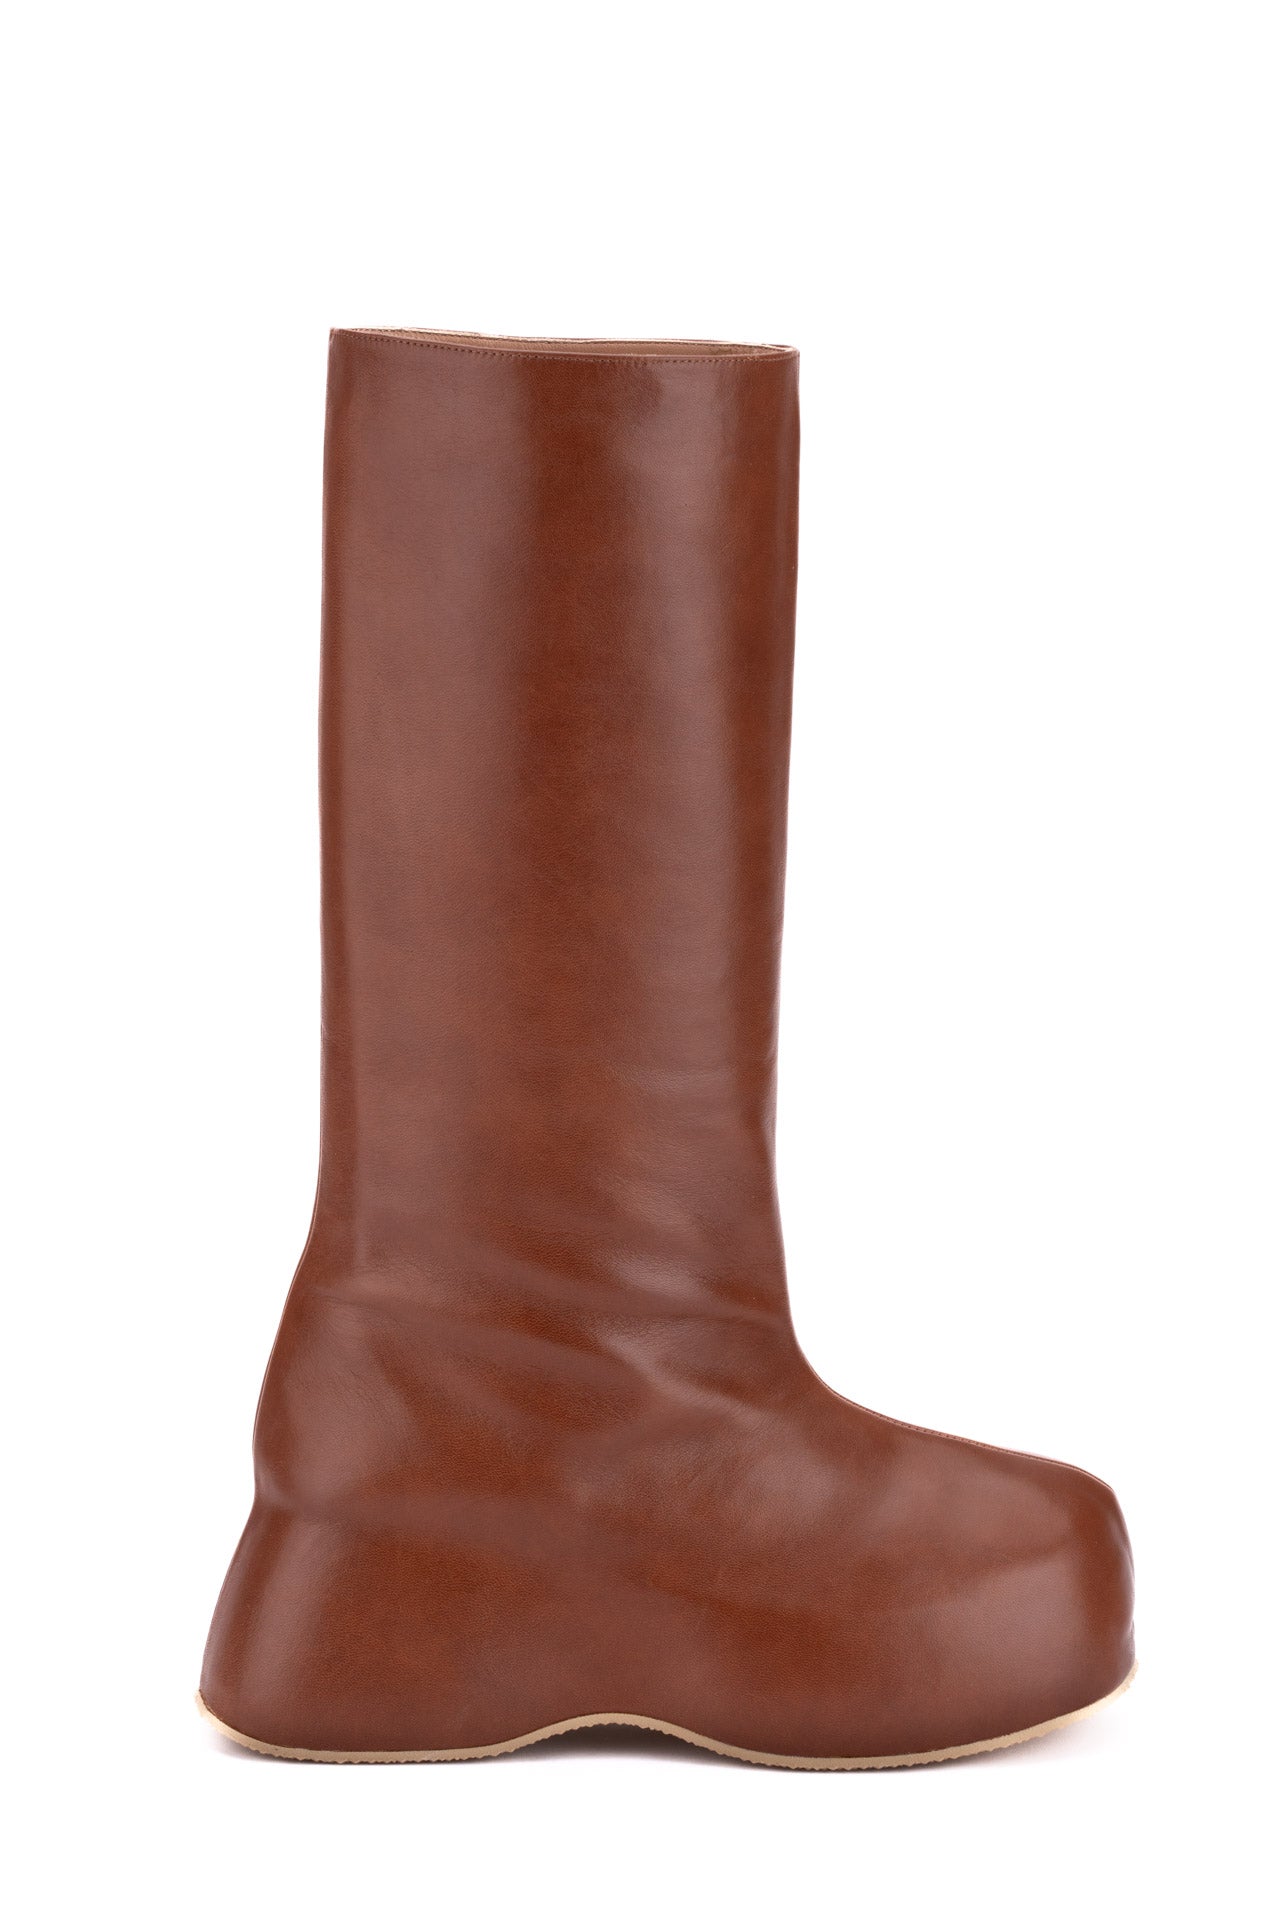 DOLLY BIRD BOOT LEATHER